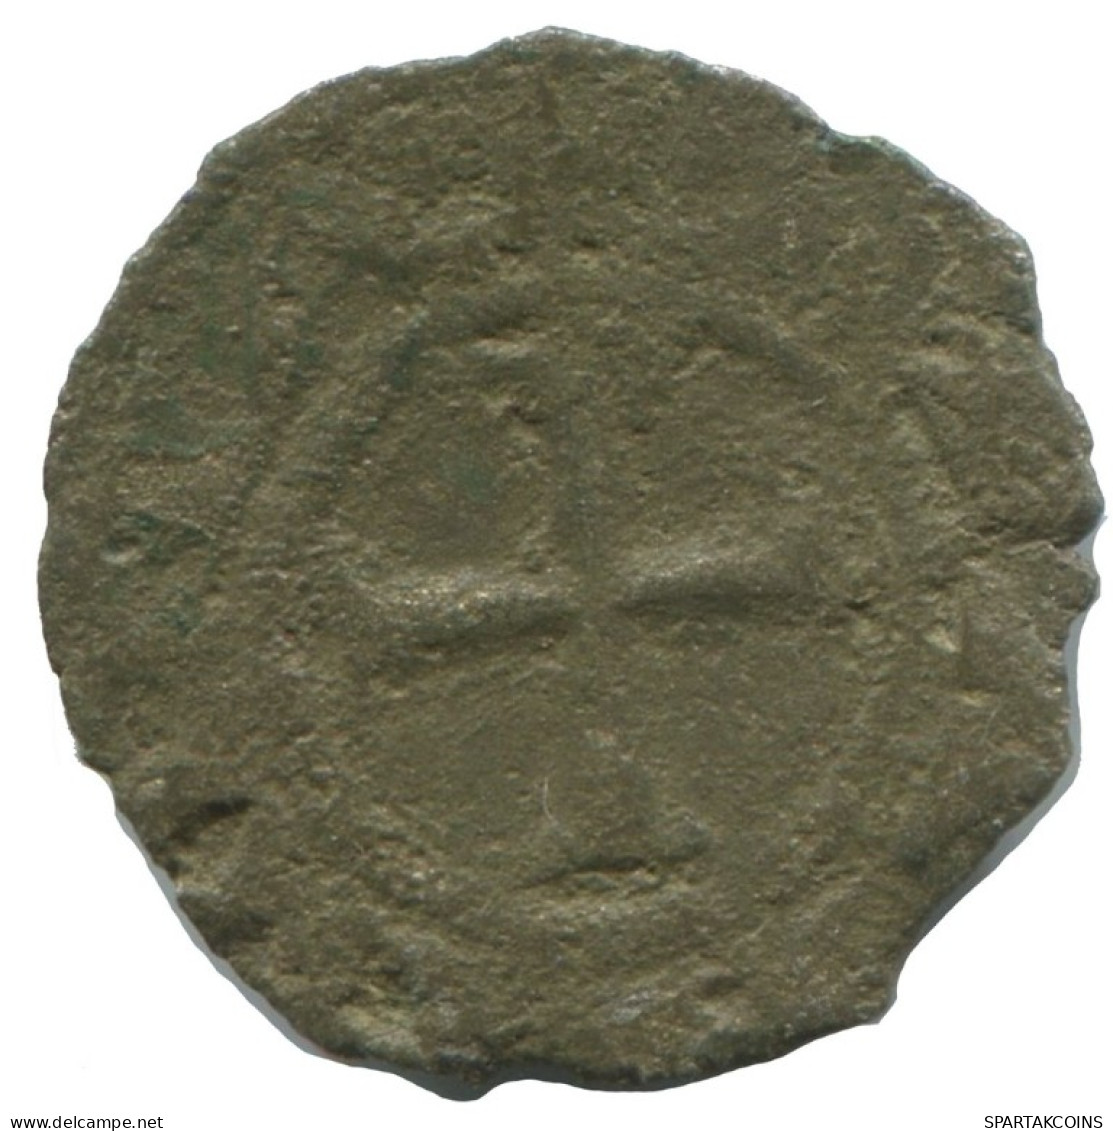 CRUSADER CROSS Authentic Original MEDIEVAL EUROPEAN Coin 0.7g/16mm #AC210.8.E.A - Andere - Europa